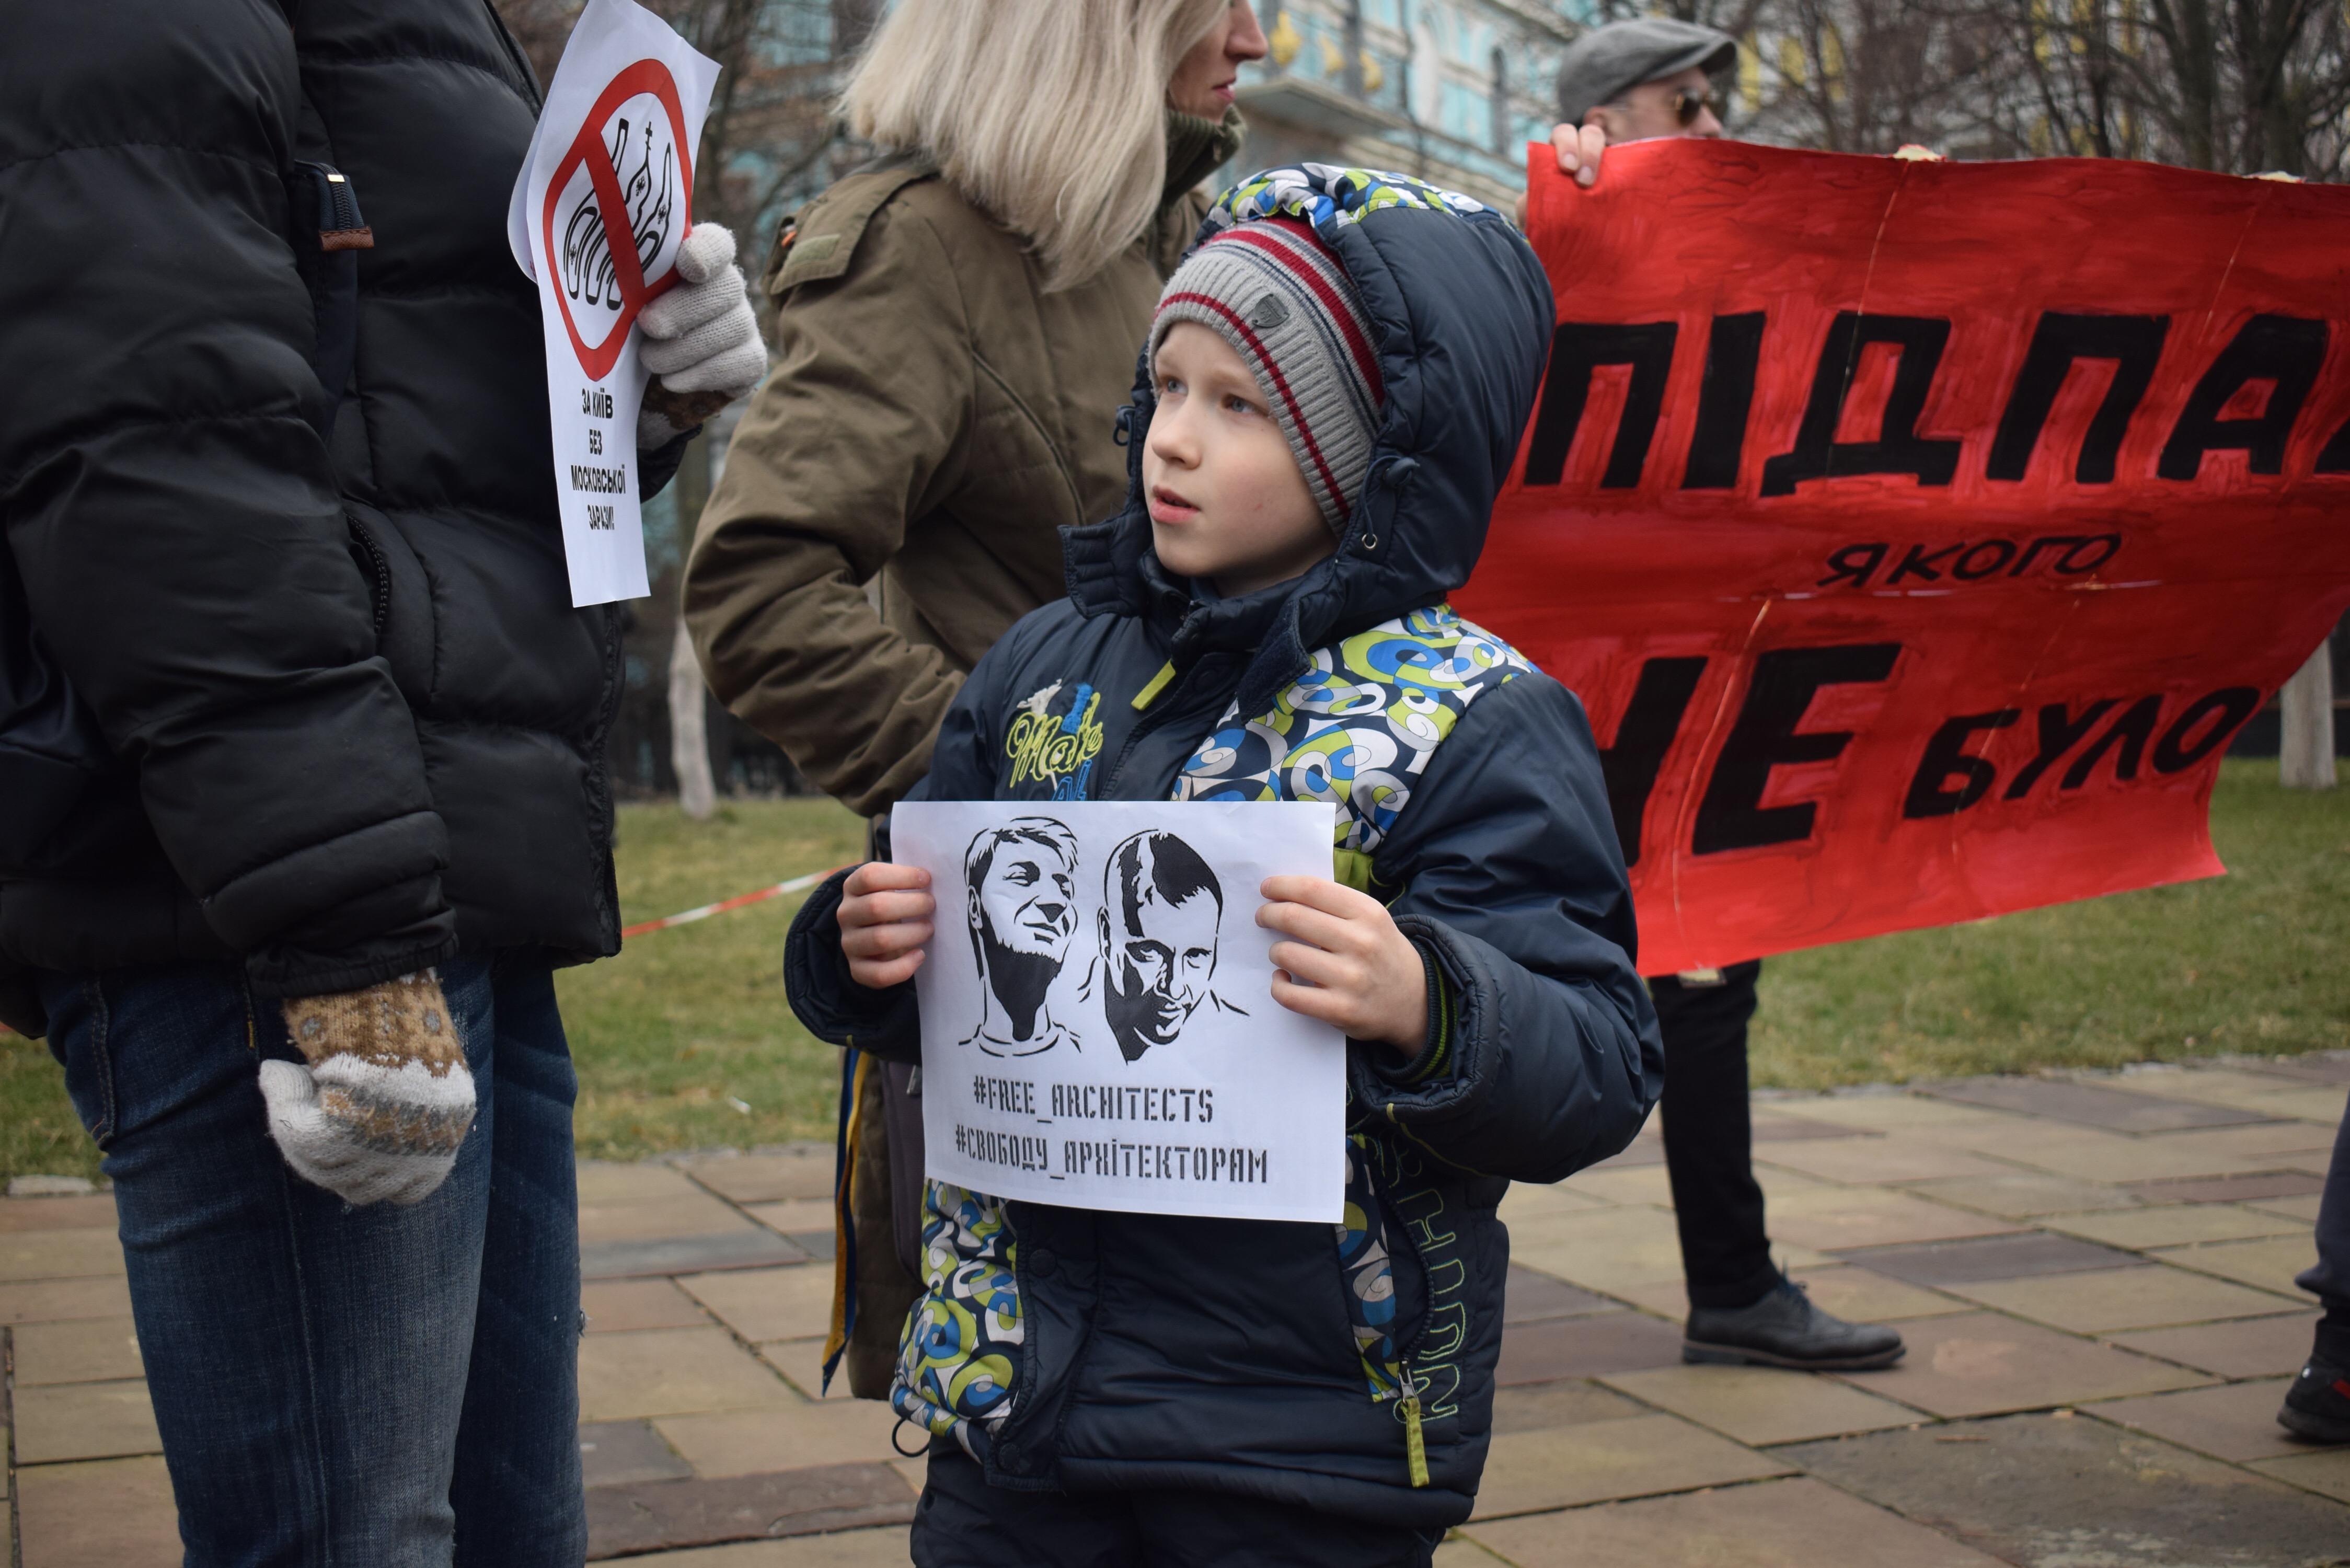 A boy holds a sign “Free architects” at the protest against the Ukrainian Orthodox Church of the Moscow Patriarchate near its chapel on Volodymyrska St. on Feb. 3. (Vlad Krasinskiy)